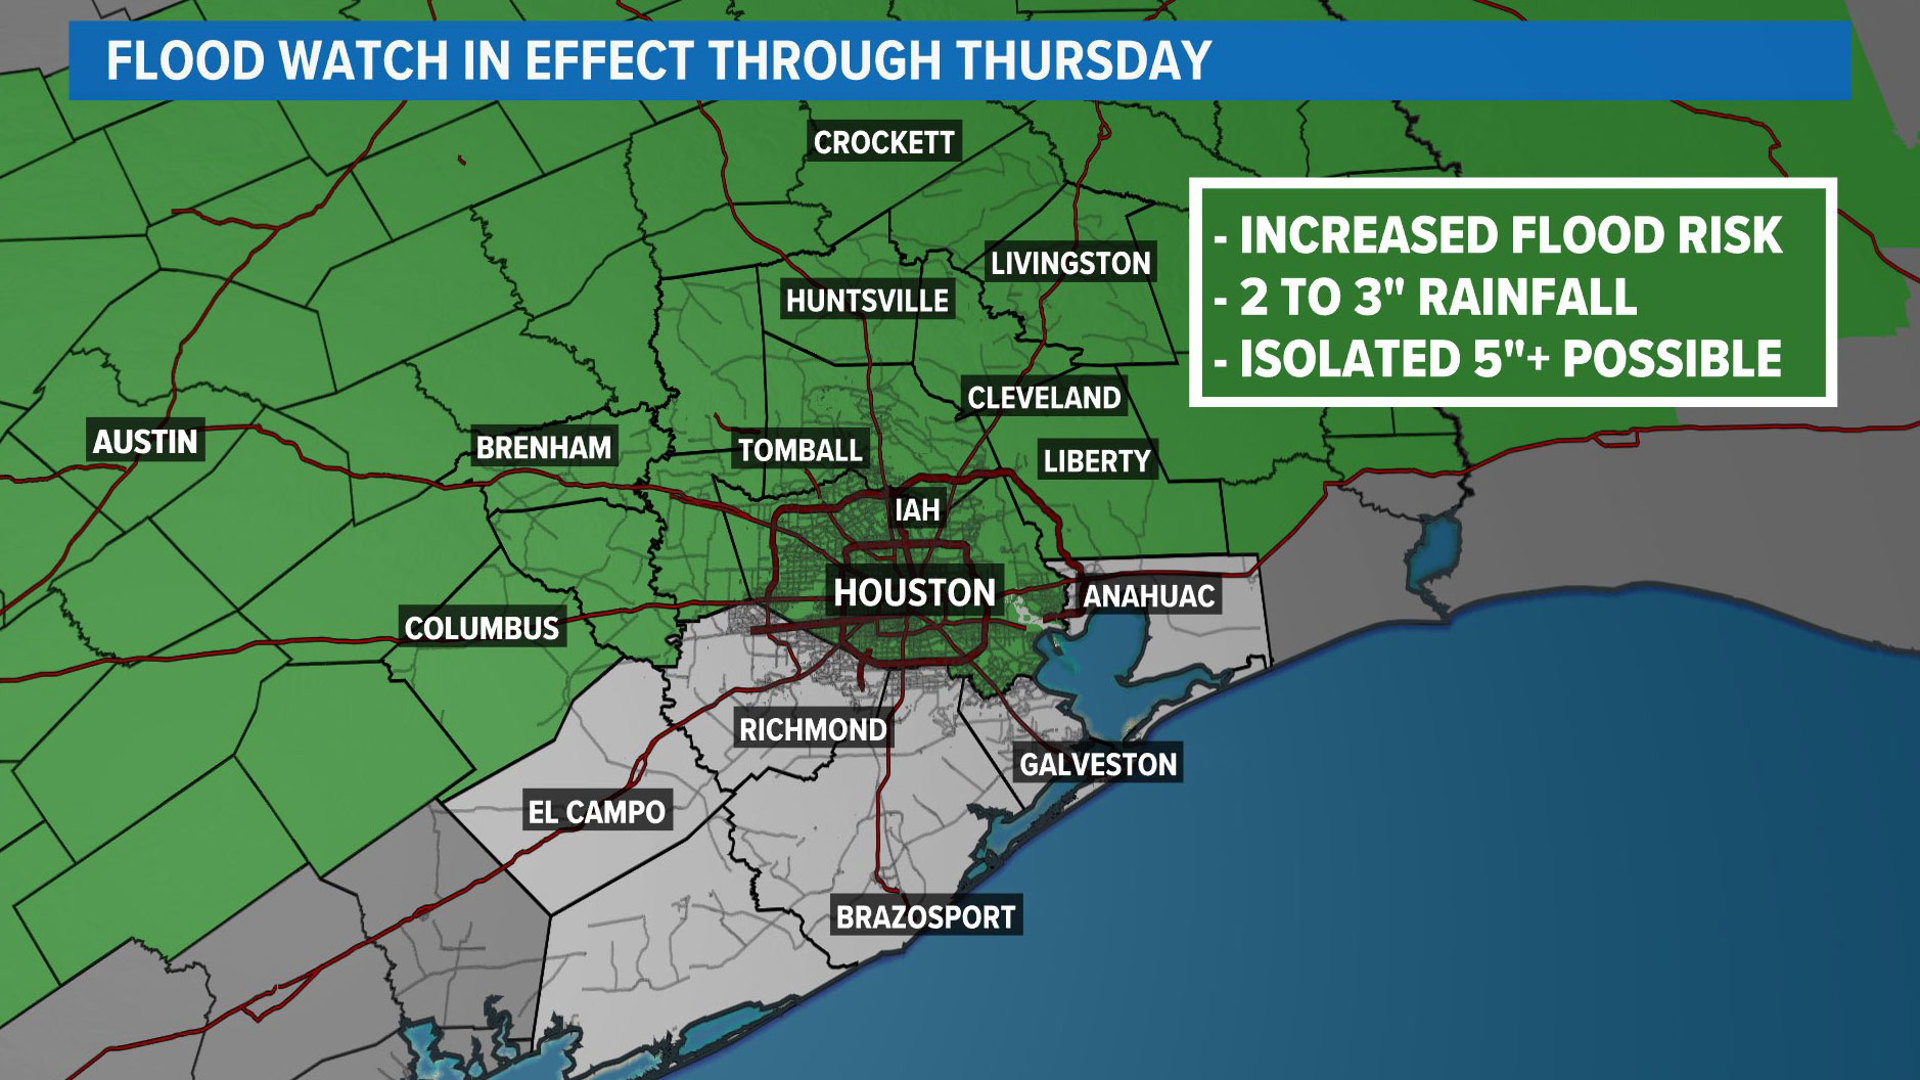 Heavy rain is expected Wednesday afternoon and Thursday morning, making the flooding issue worse.